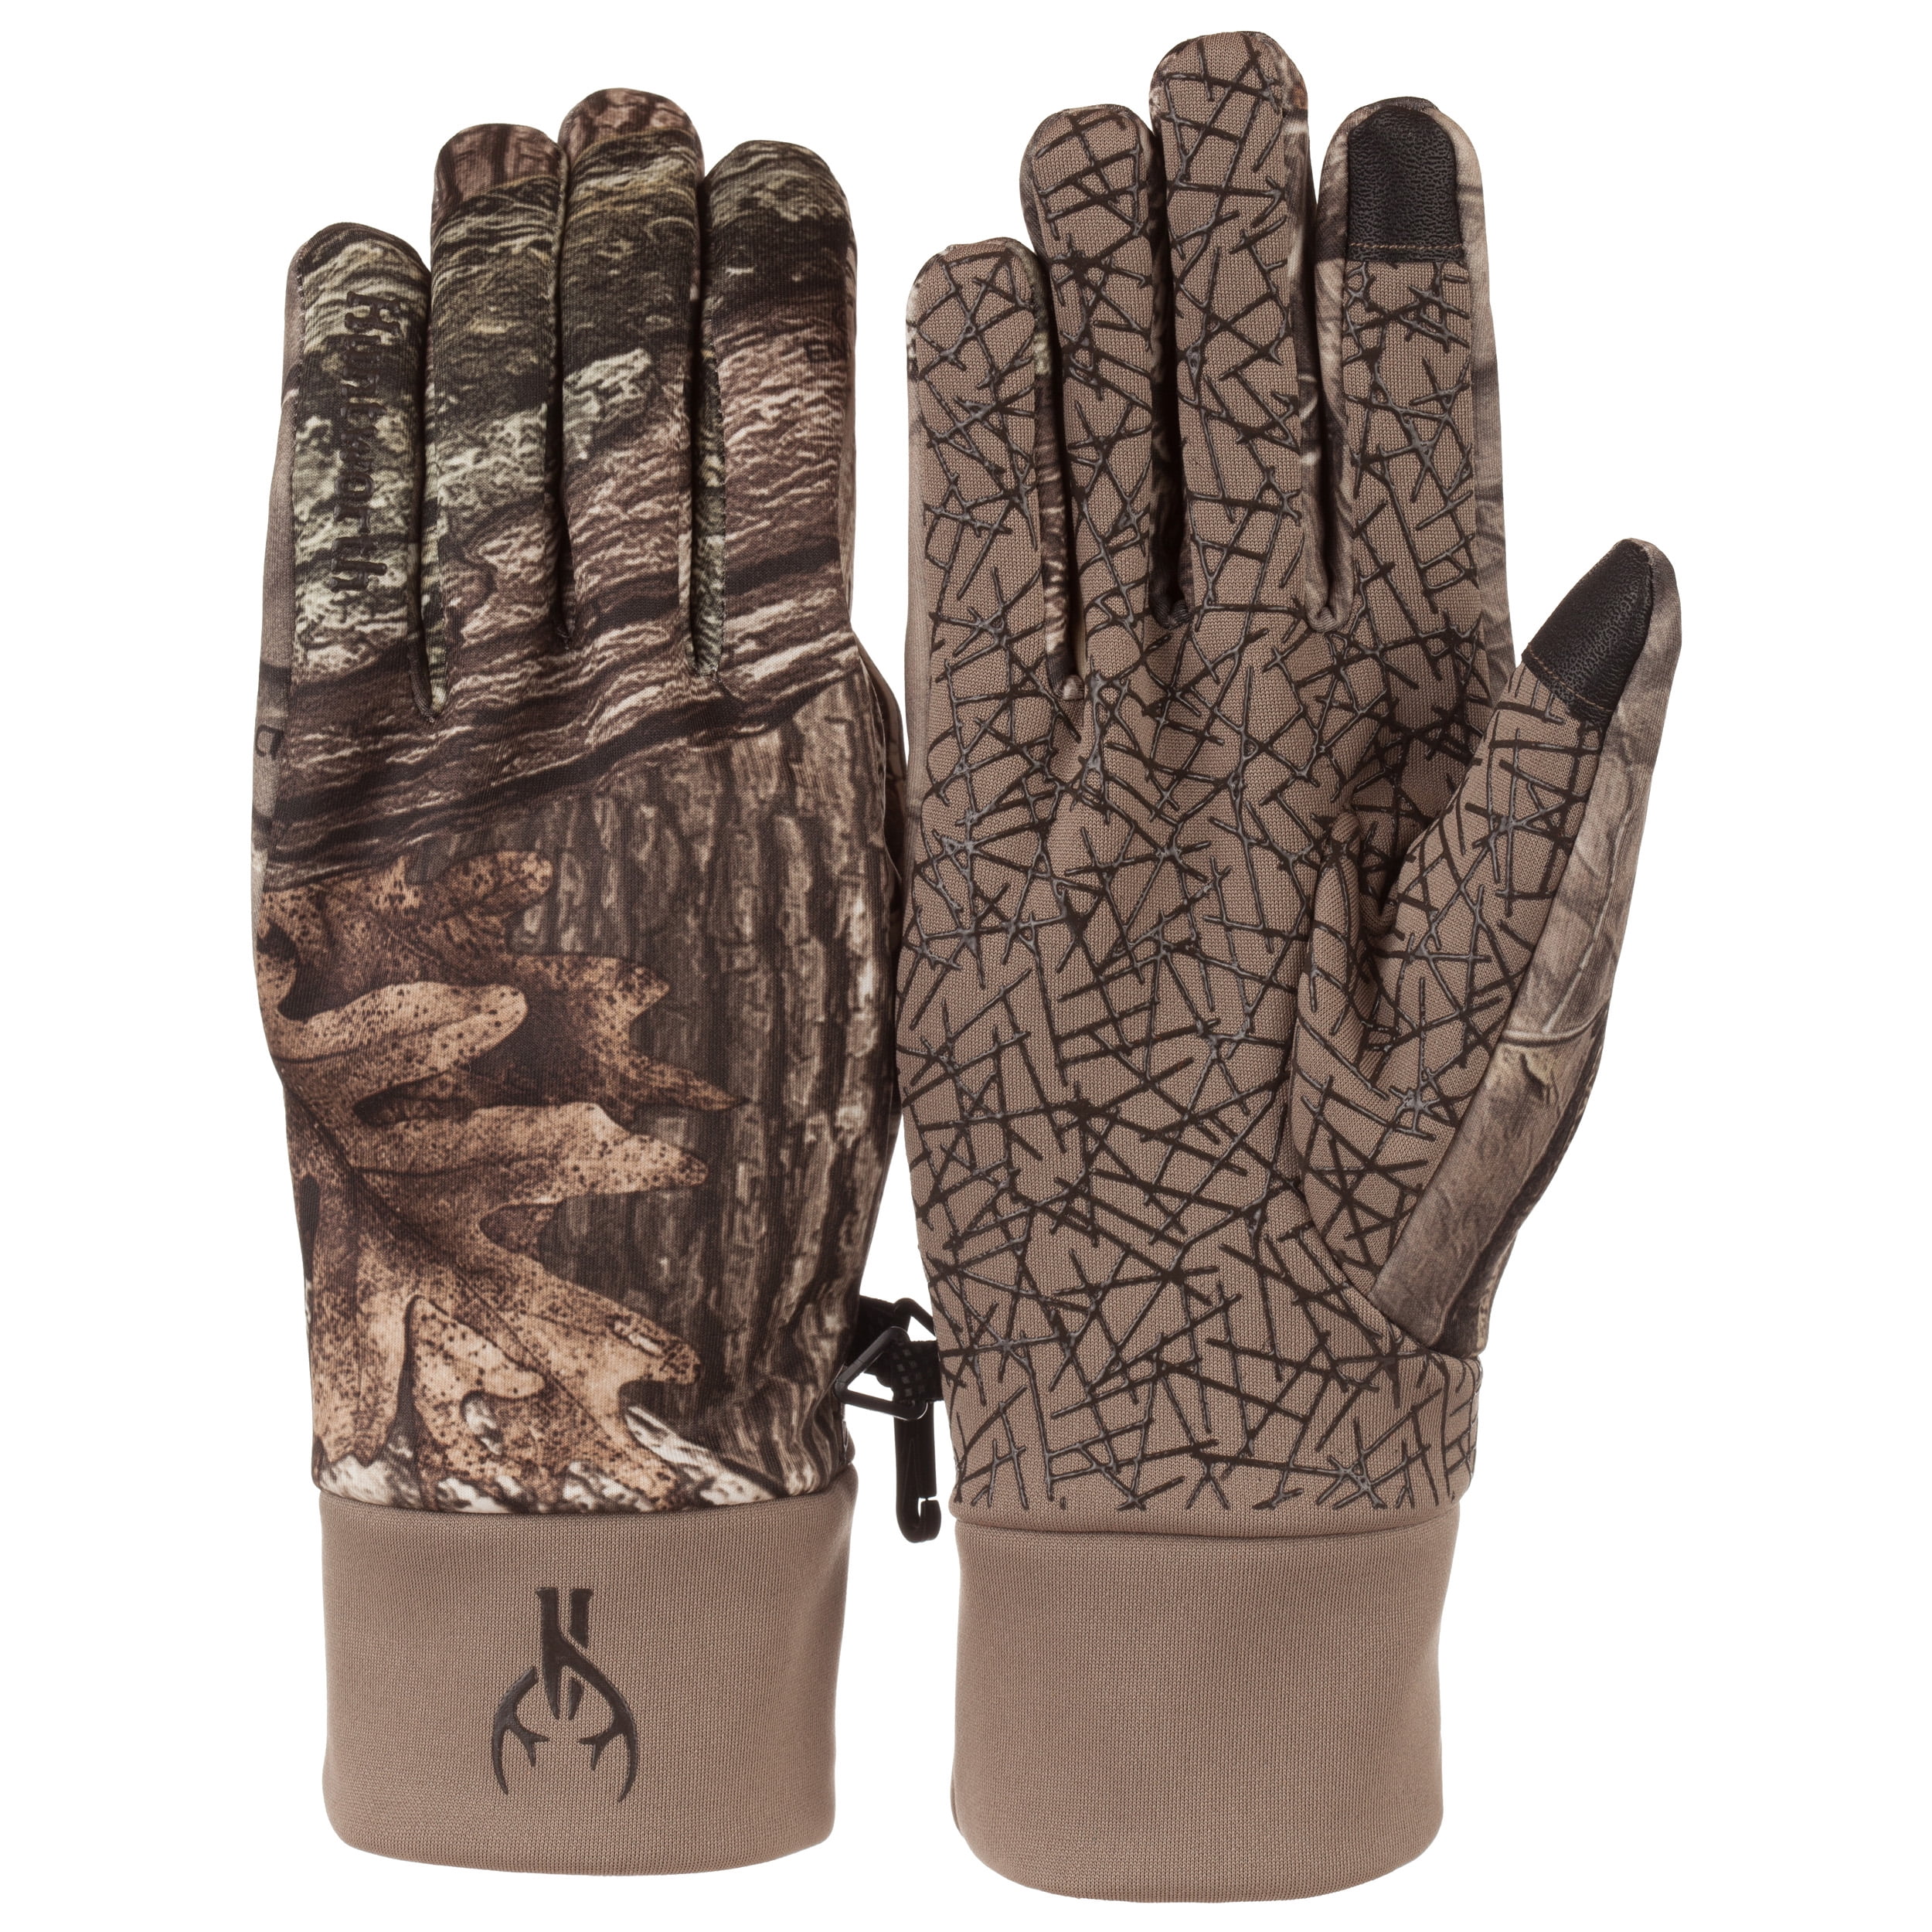 NEW Huntworth Gunner Midweight Gloves Mens Realtree Camo High Tack Grip 